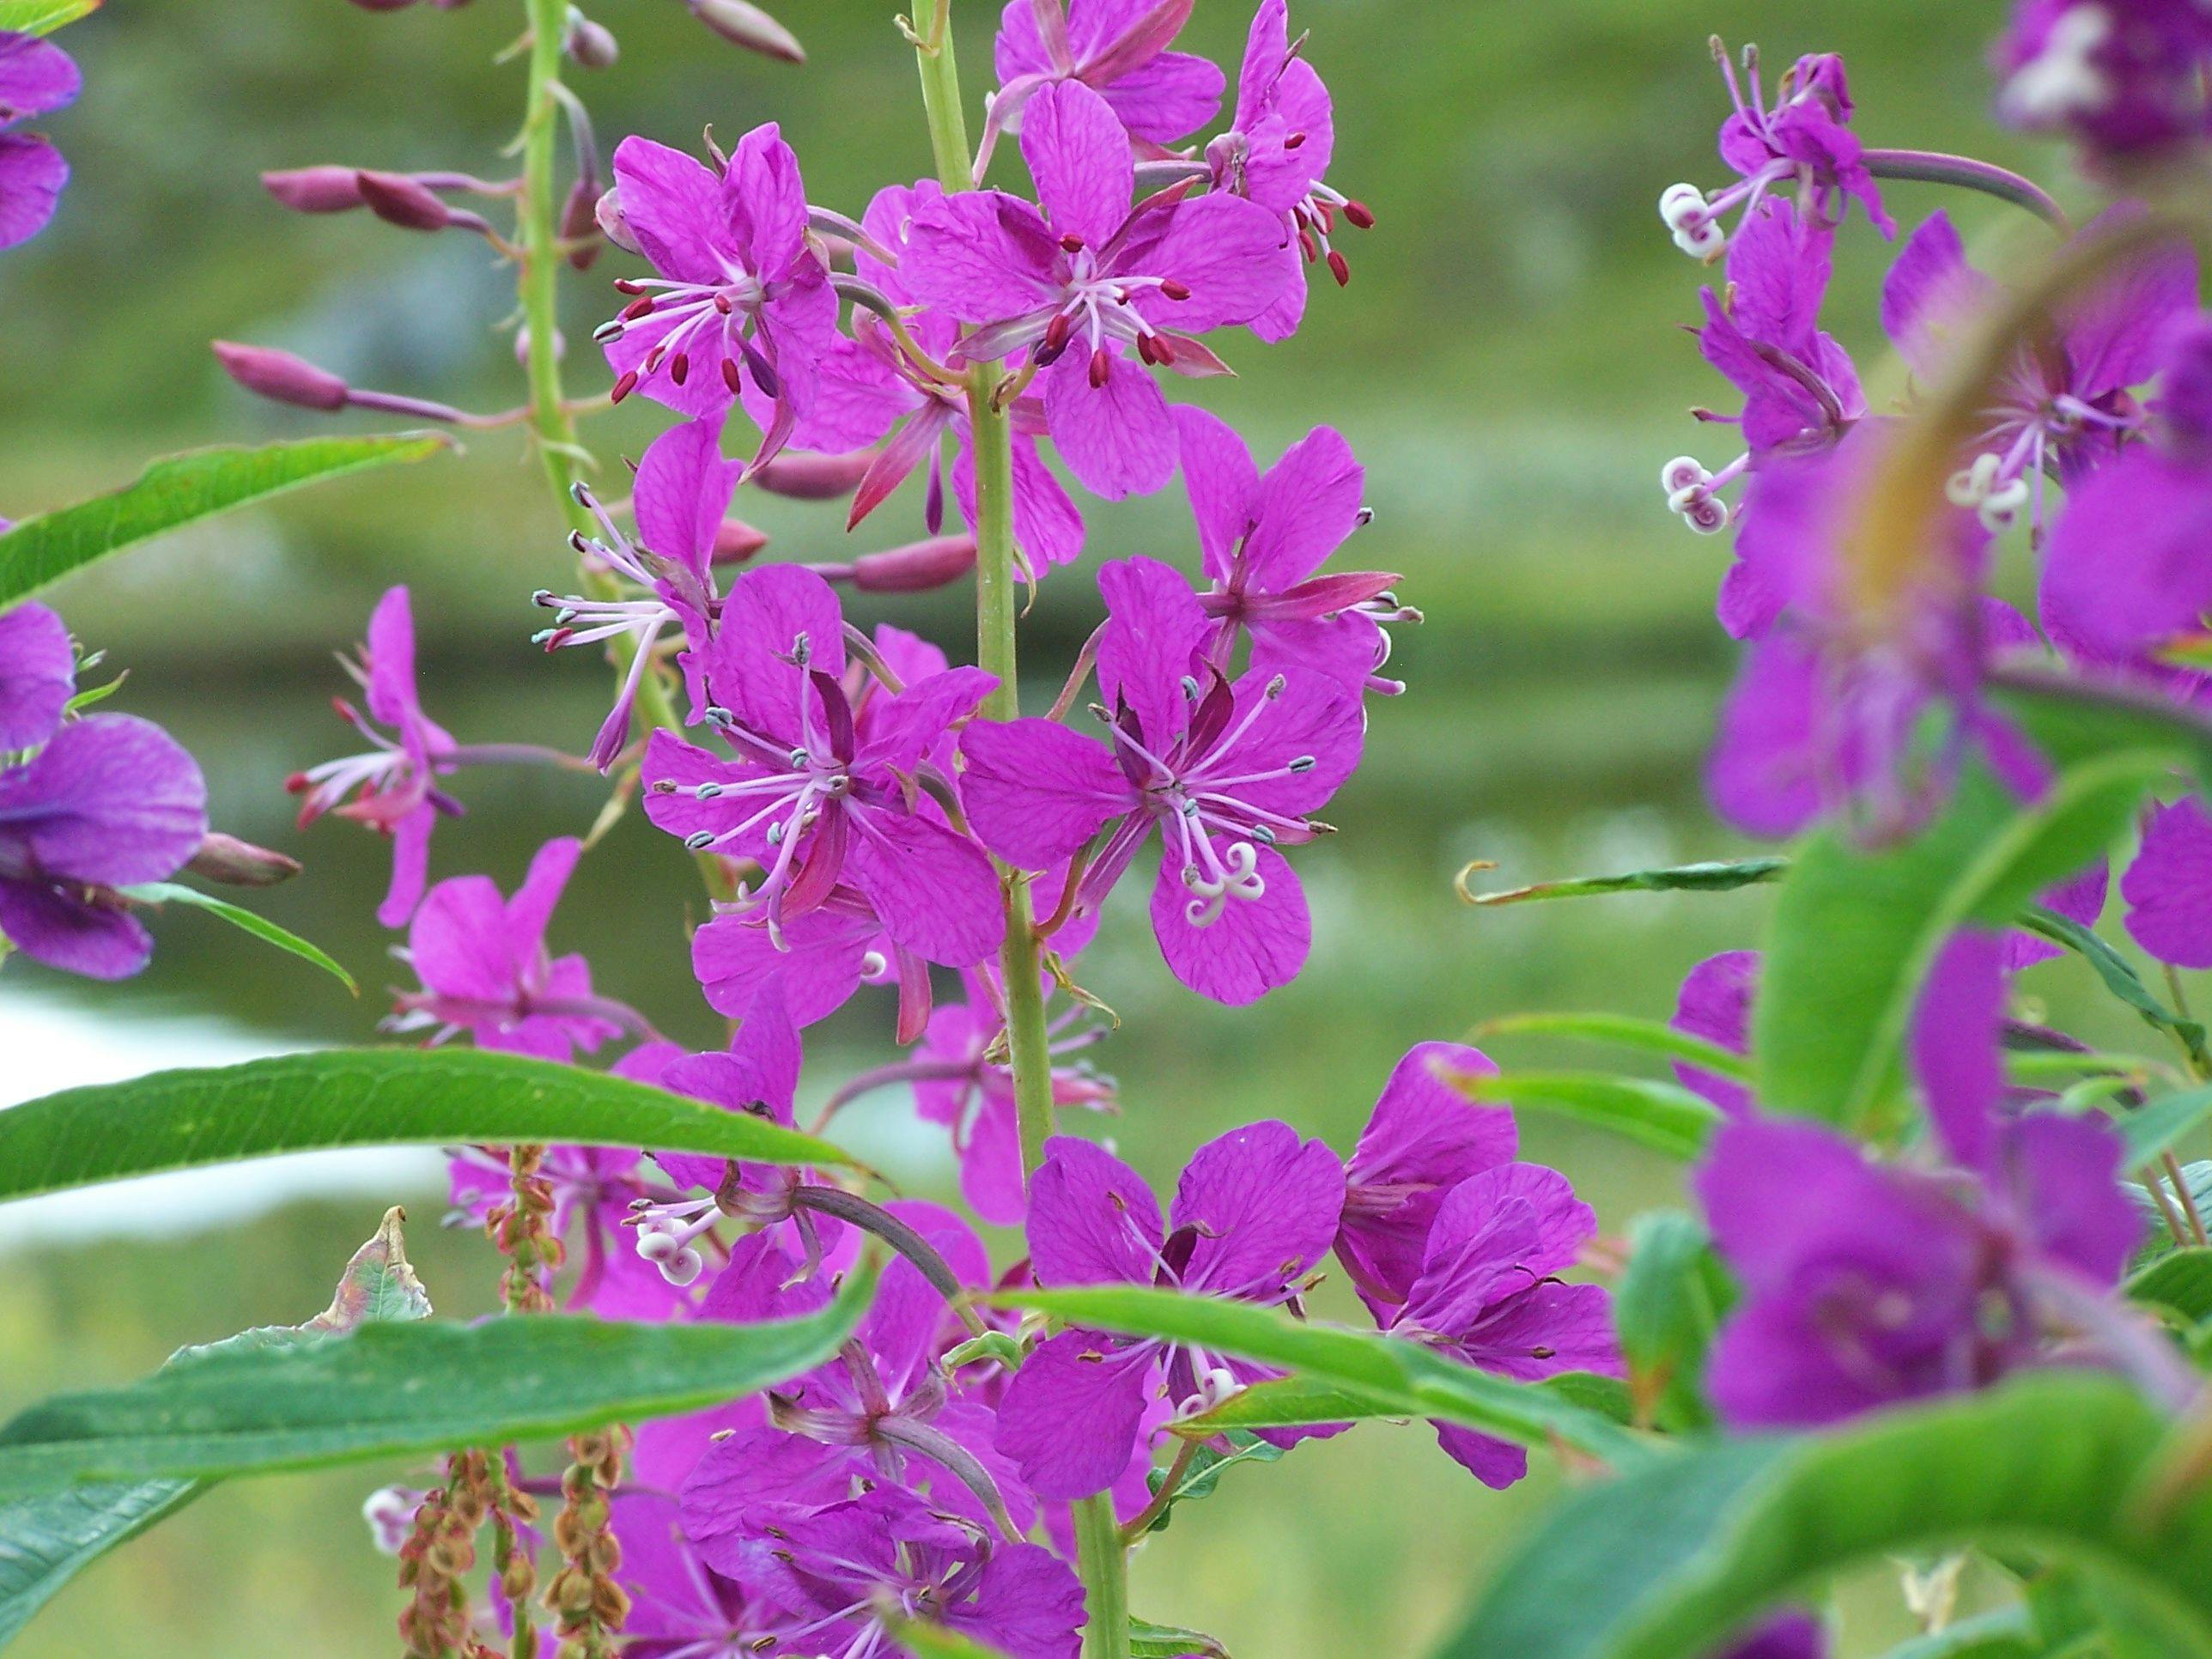 Close-up of Purple Flowers Blooming Outdoors